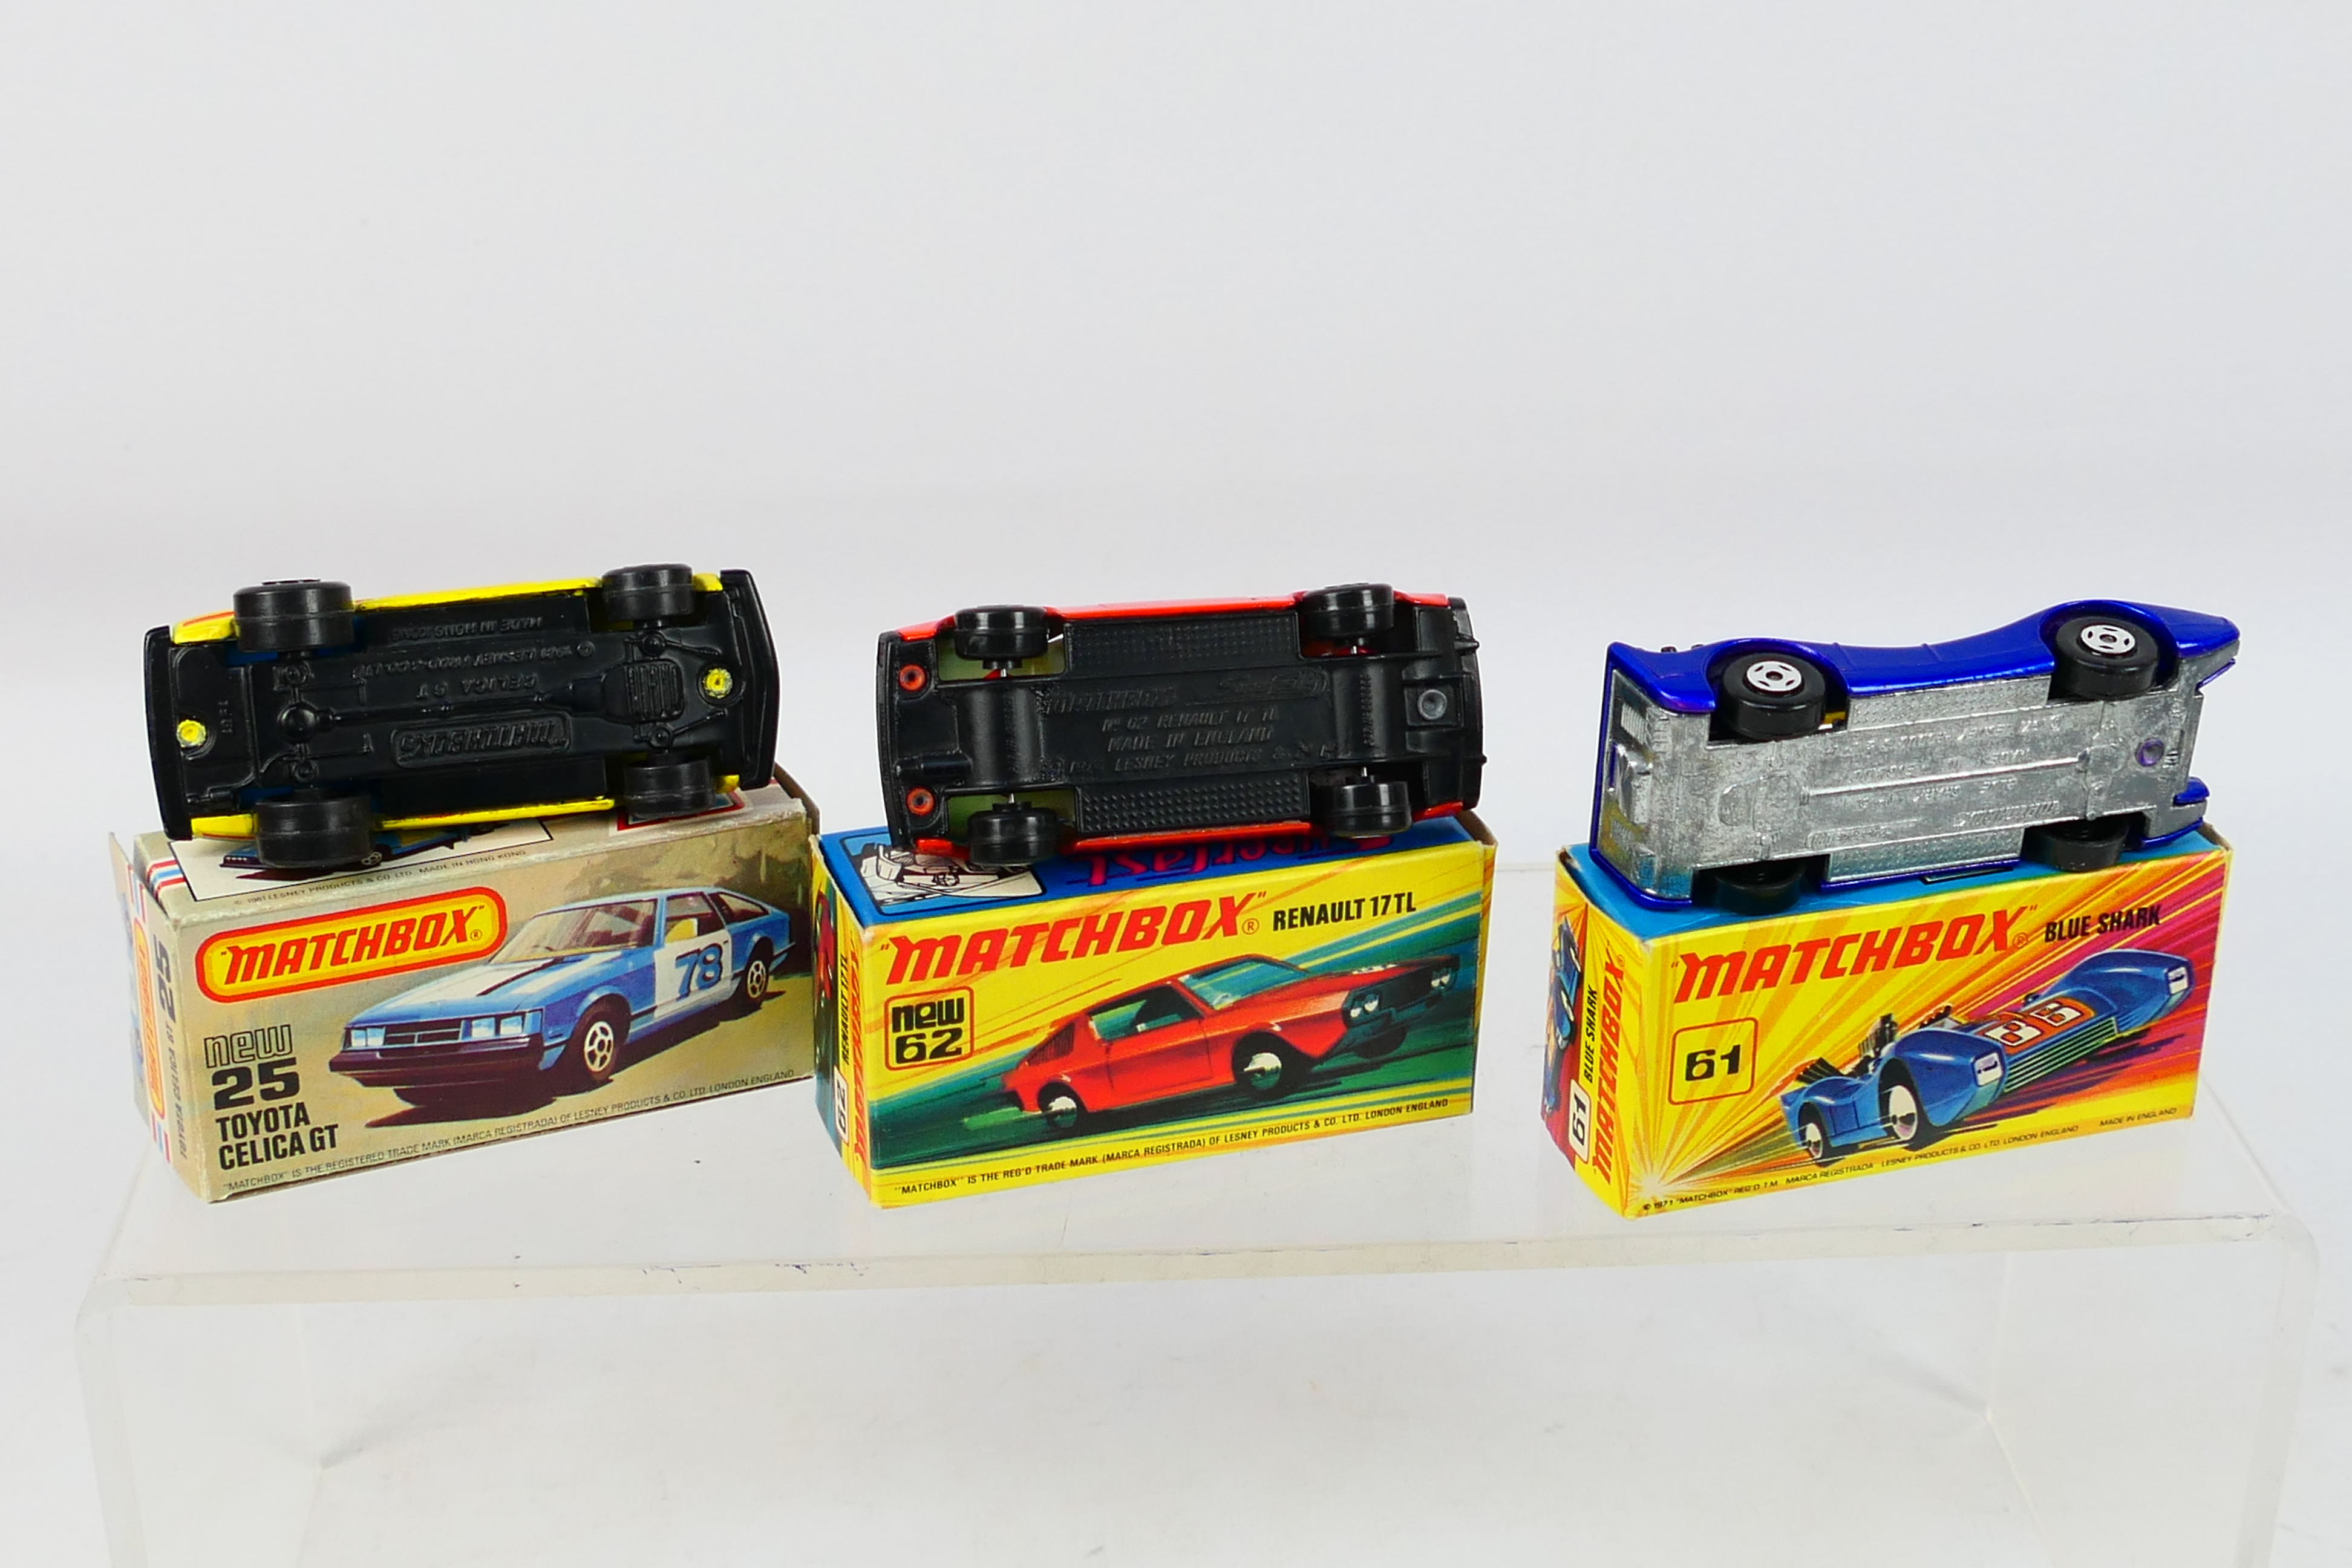 Matchbox - Superfast - 3 x boxed models, Toyota Celica GT # 25, - Image 7 of 7